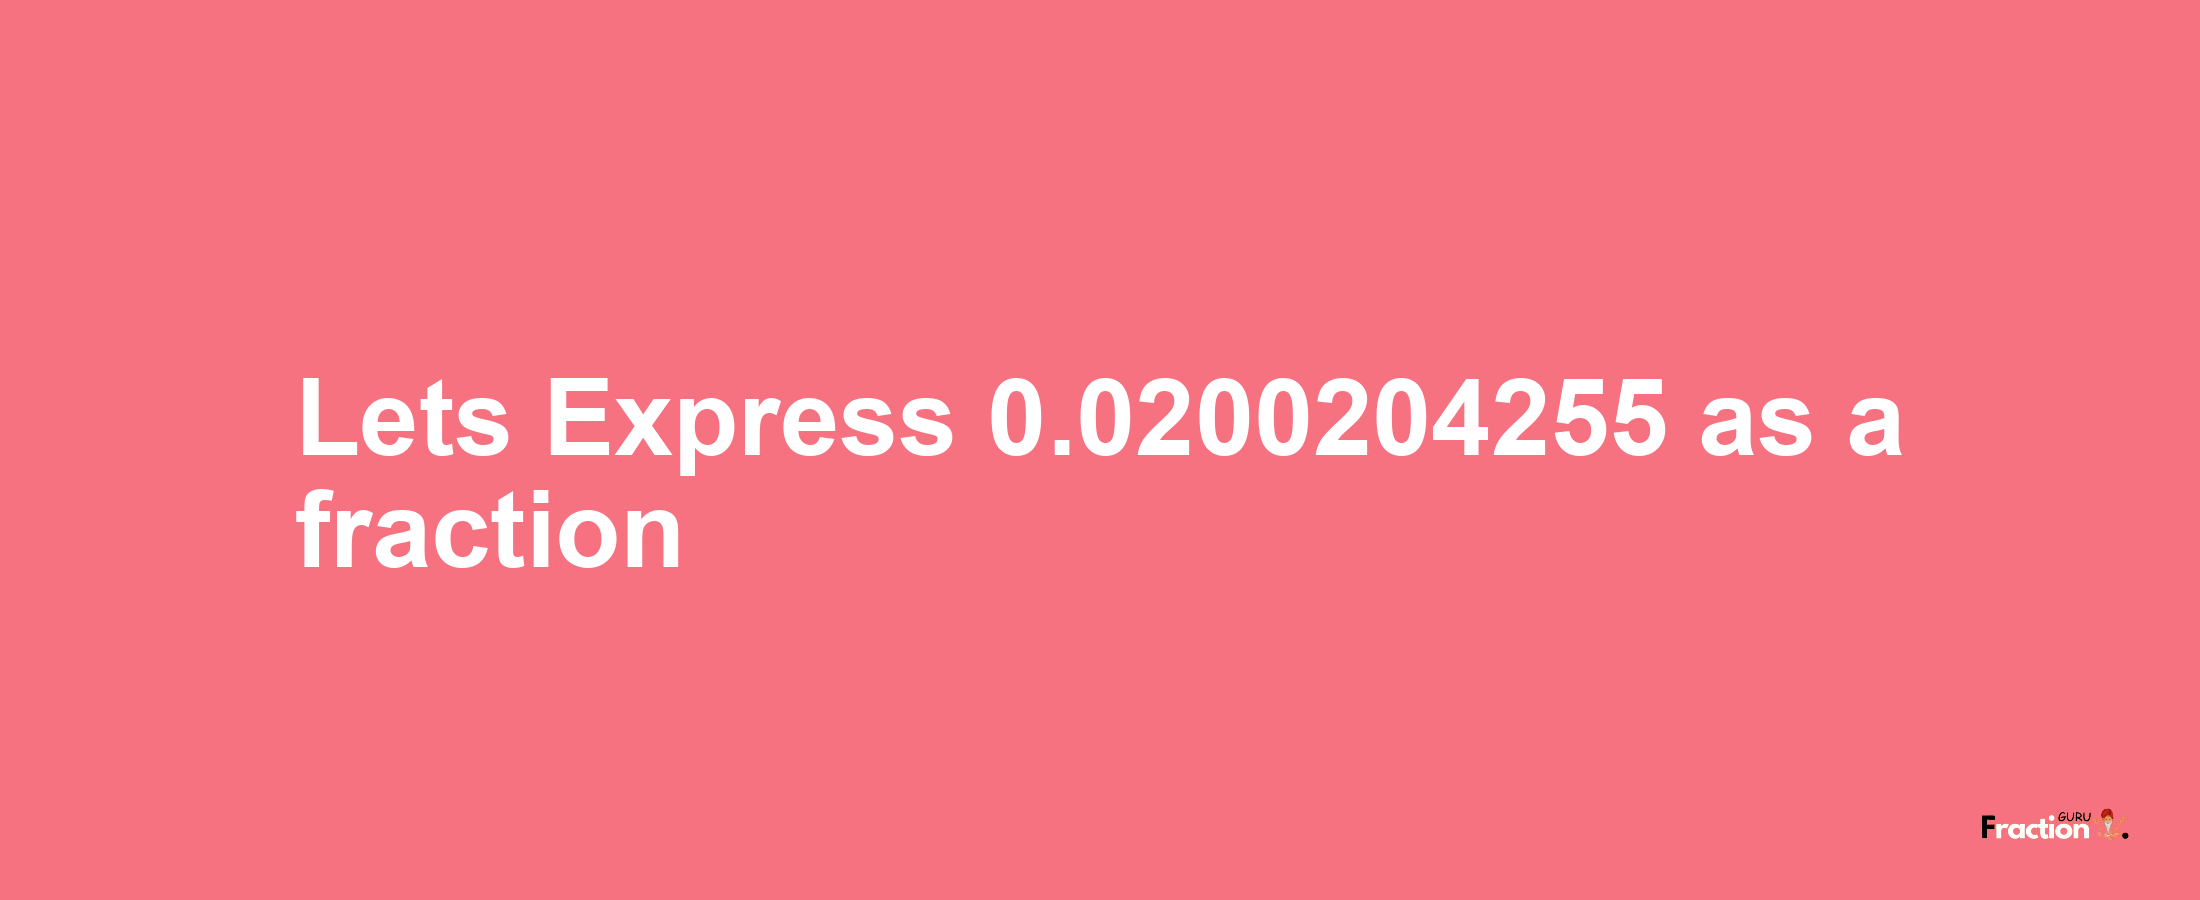 Lets Express 0.0200204255 as afraction